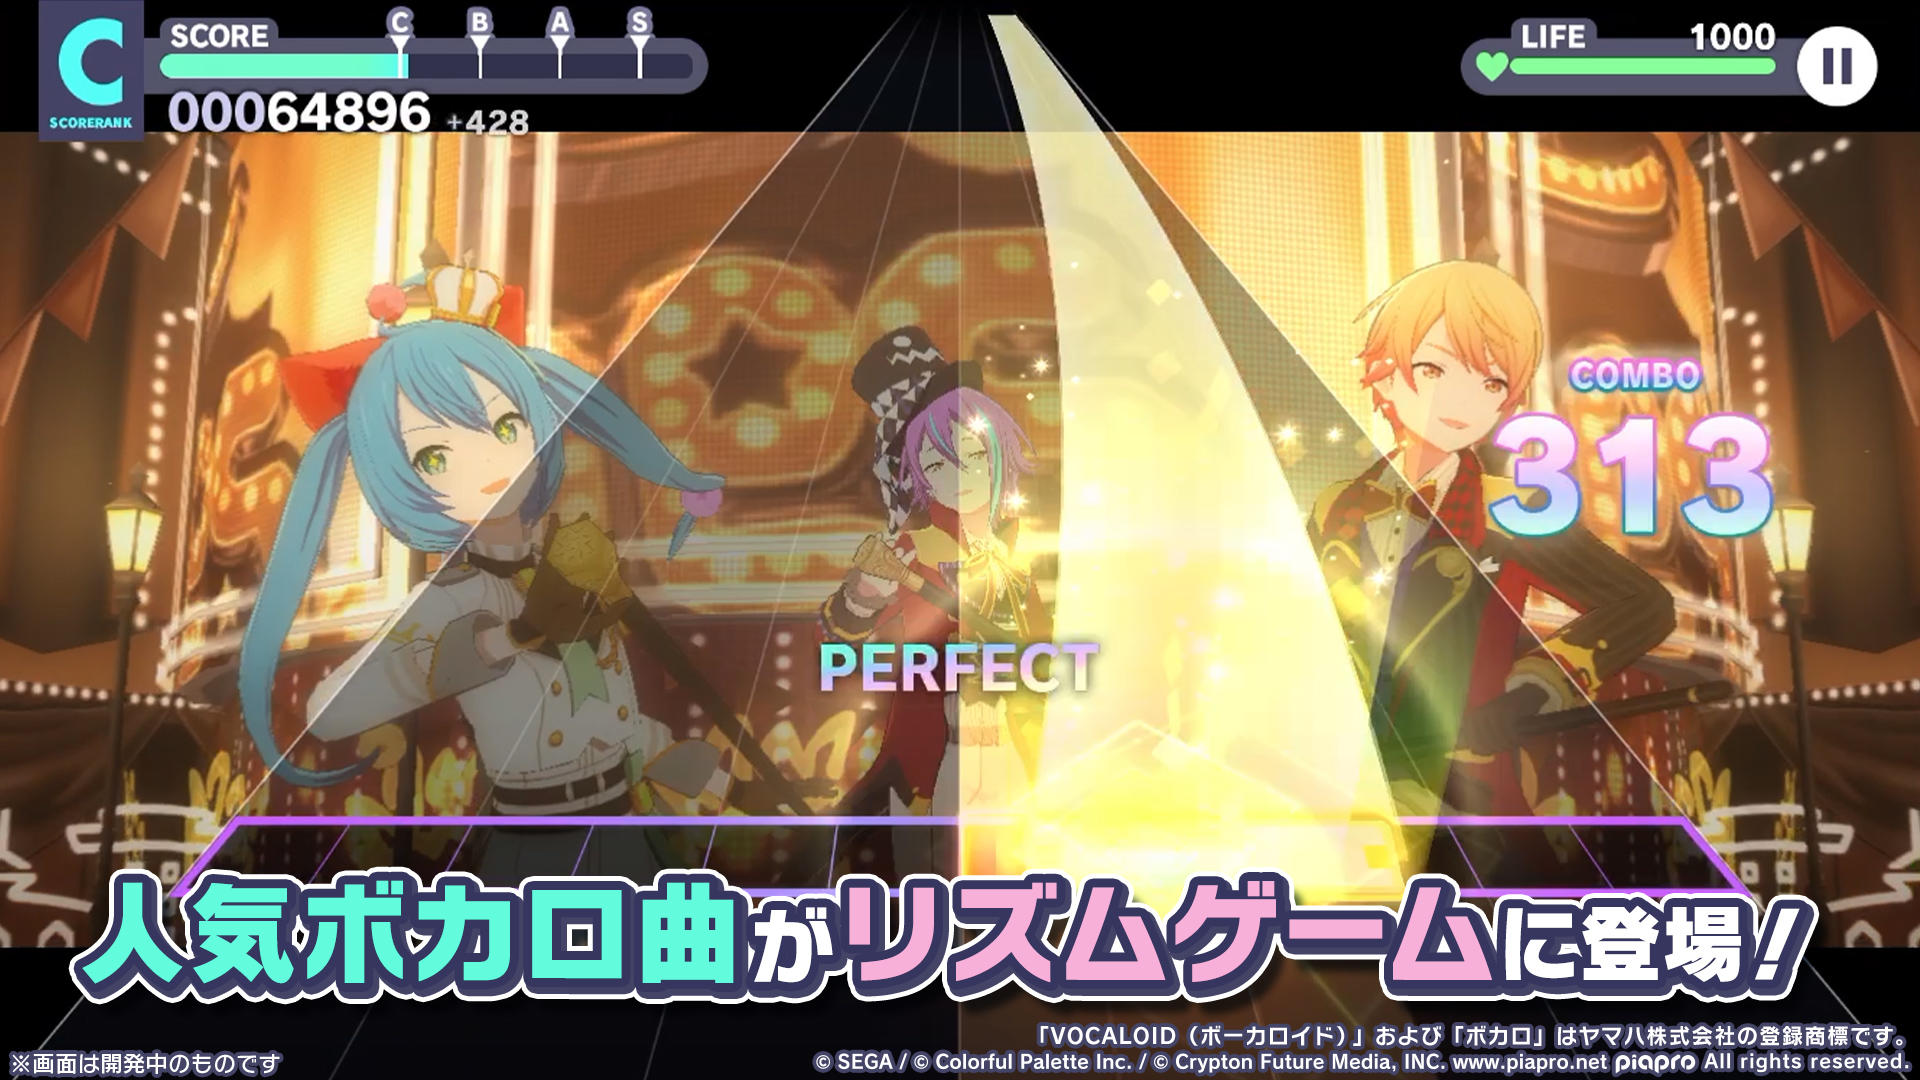 Project Sekai: Colorful Stage feat. Hatsune Miku Mobile Game To Release  September 30th, Details Virtual Live Feature – OTAQUEST